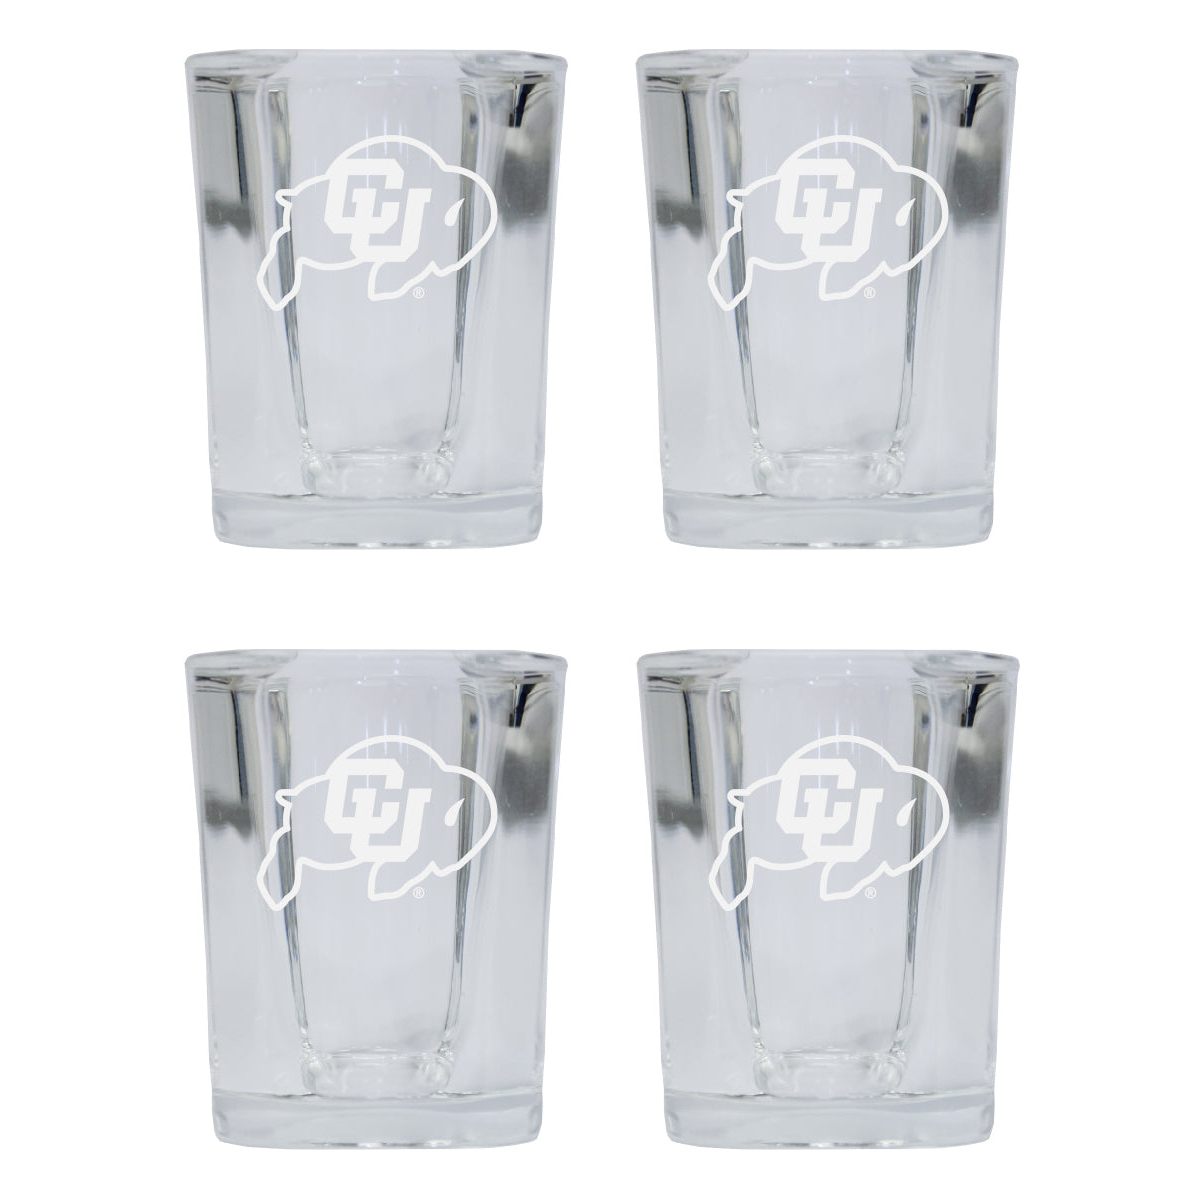 Colorado Buffaloes 2 Ounce Square Shot Glass Laser Etched Logo Design 4-Pack